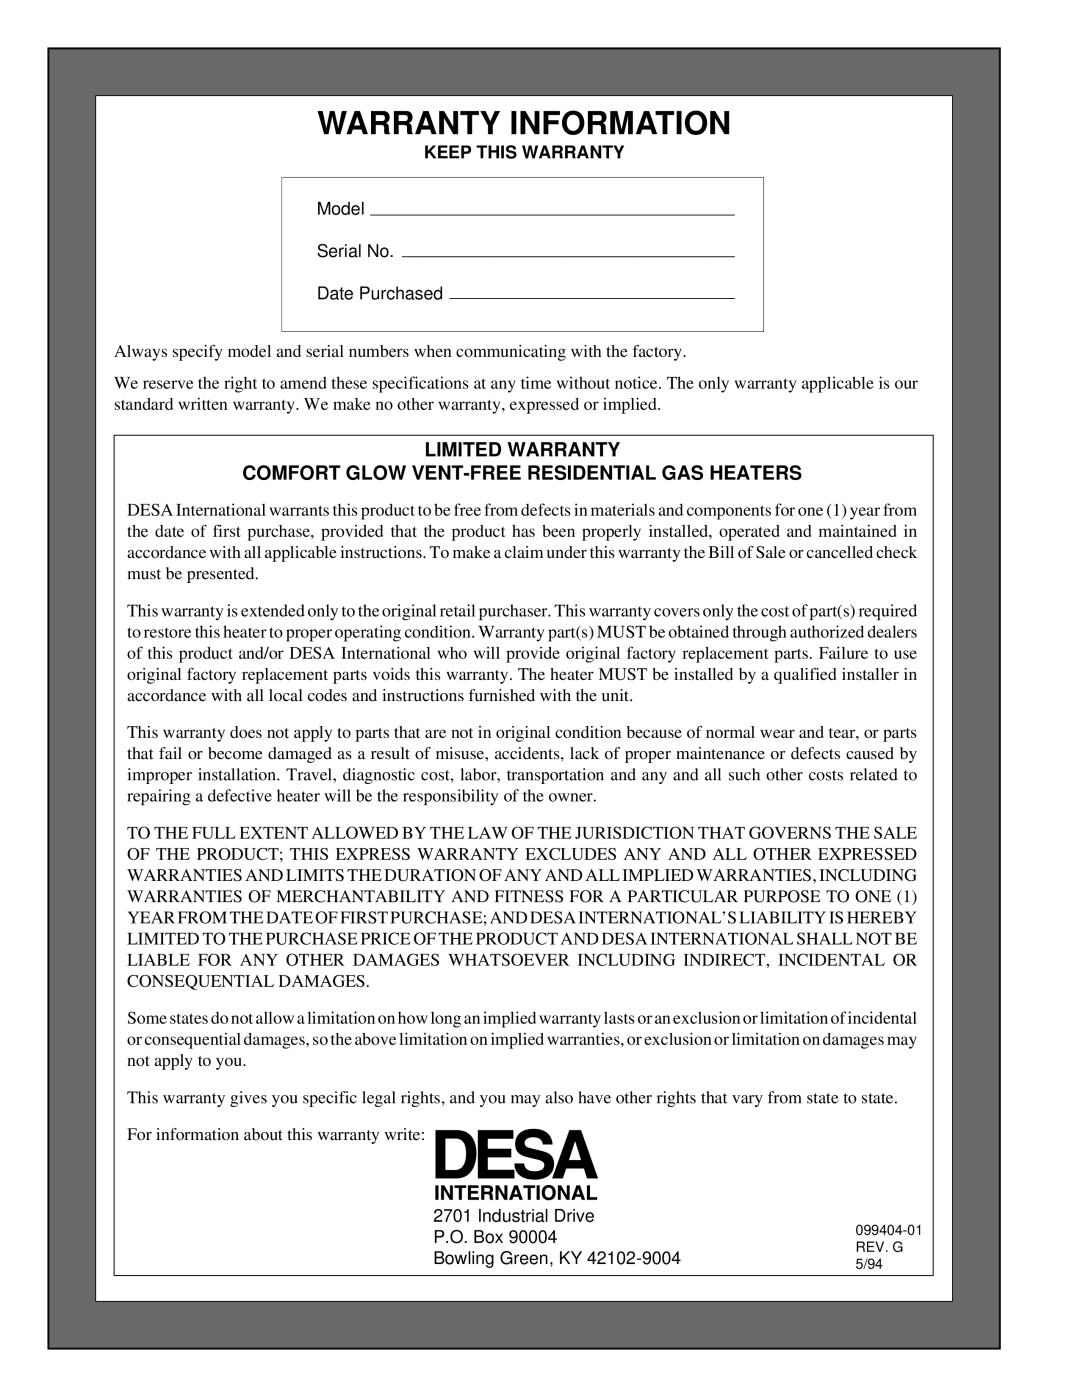 Desa CGN10 installation manual Warranty Information, Limited Warranty Comfort Glow Vent-Free Residential Gas Heaters 